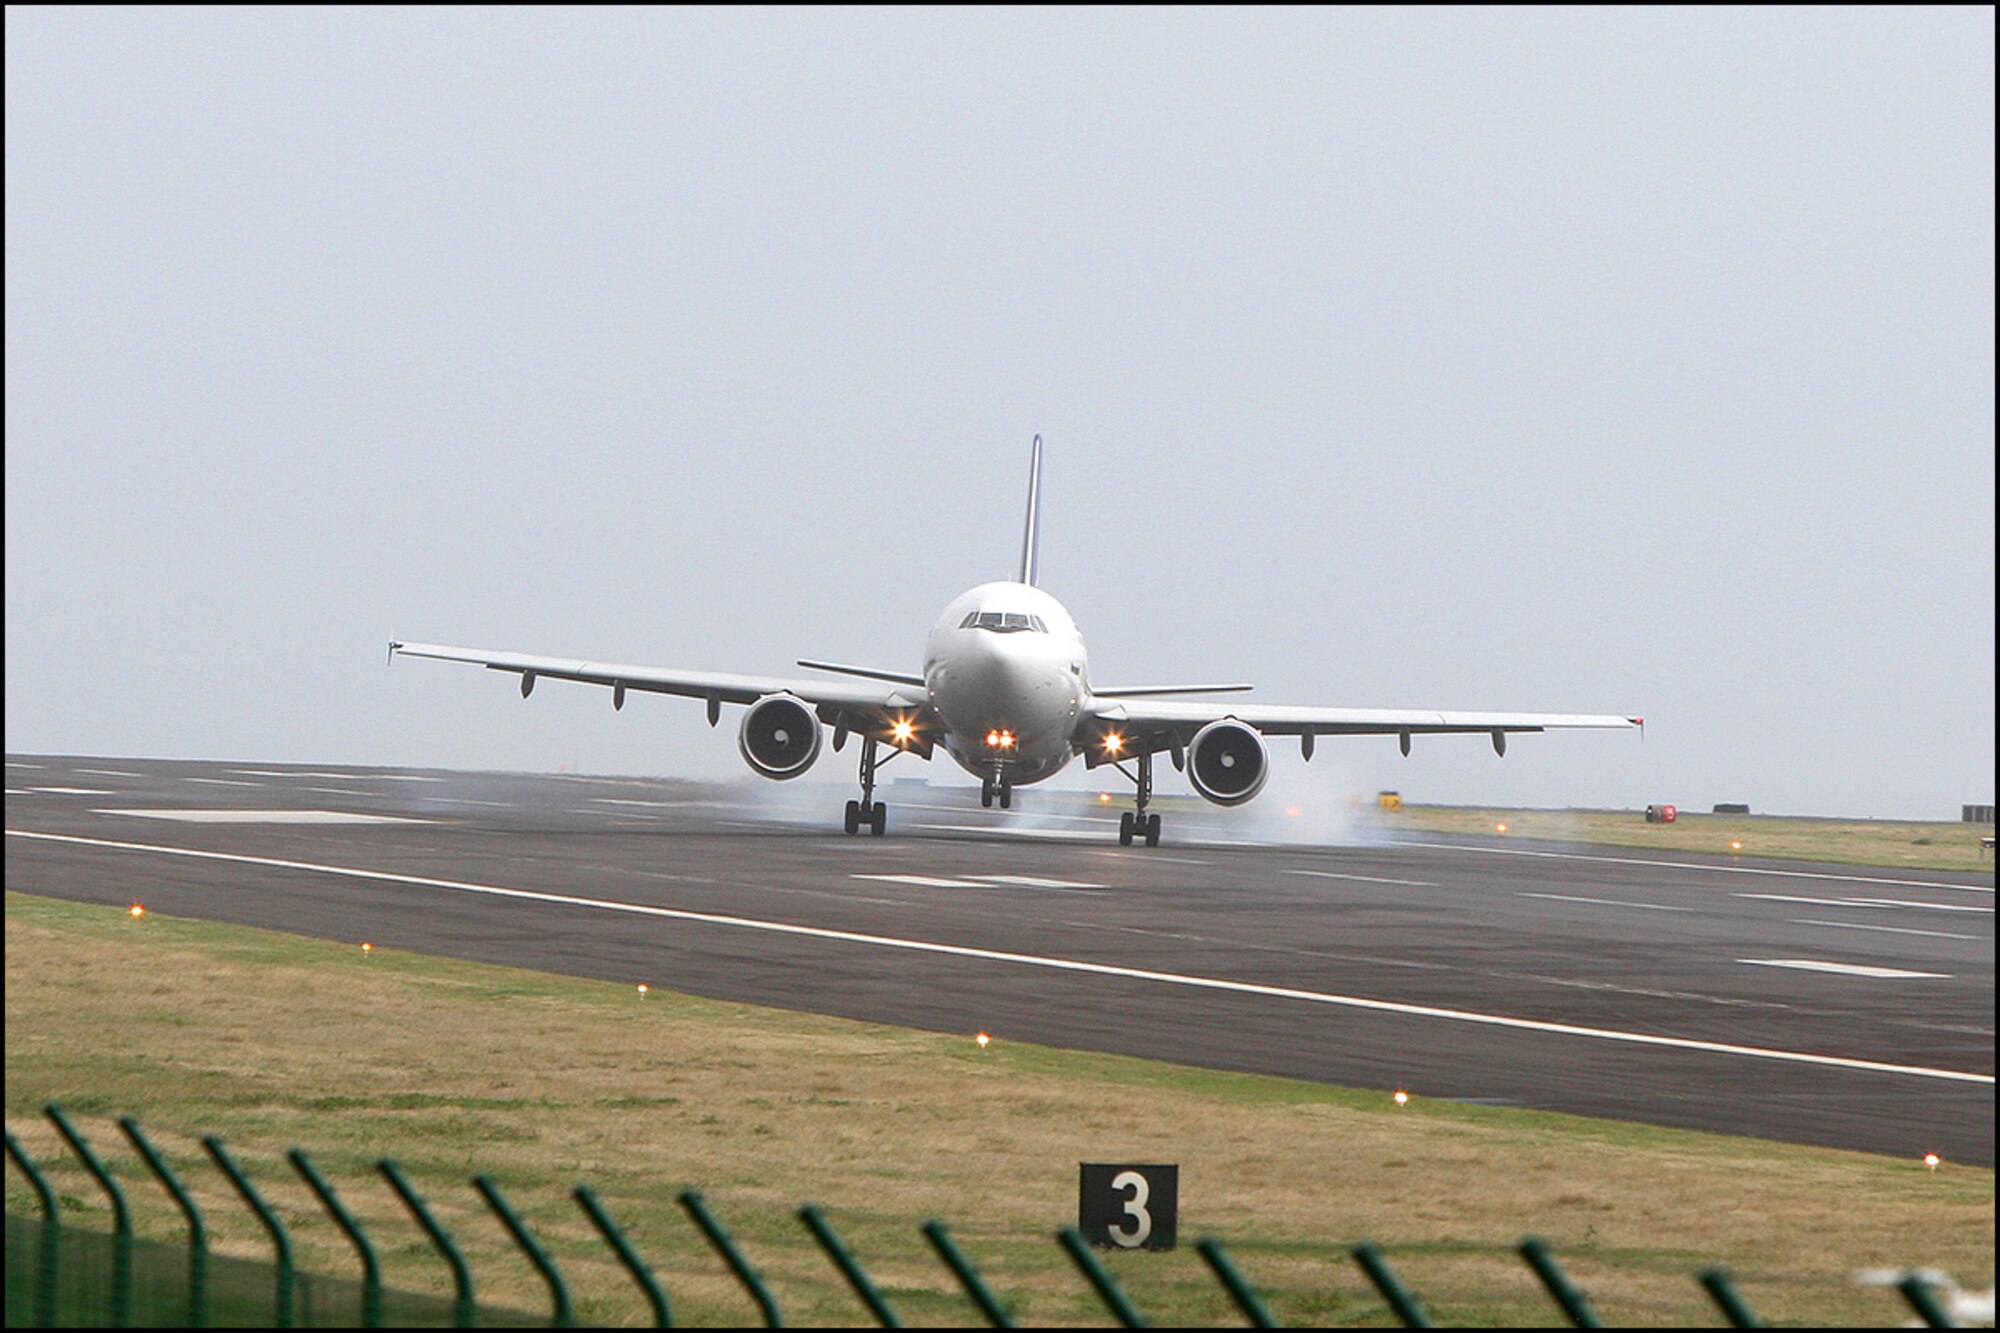 An Airbus A310-300 crabbing onto runway 15 at Lajes Field in the Azores, Portugal. Lajes experienced severe turbulence and exceptionally strong crosswinds. (Photo by James O’Rear)